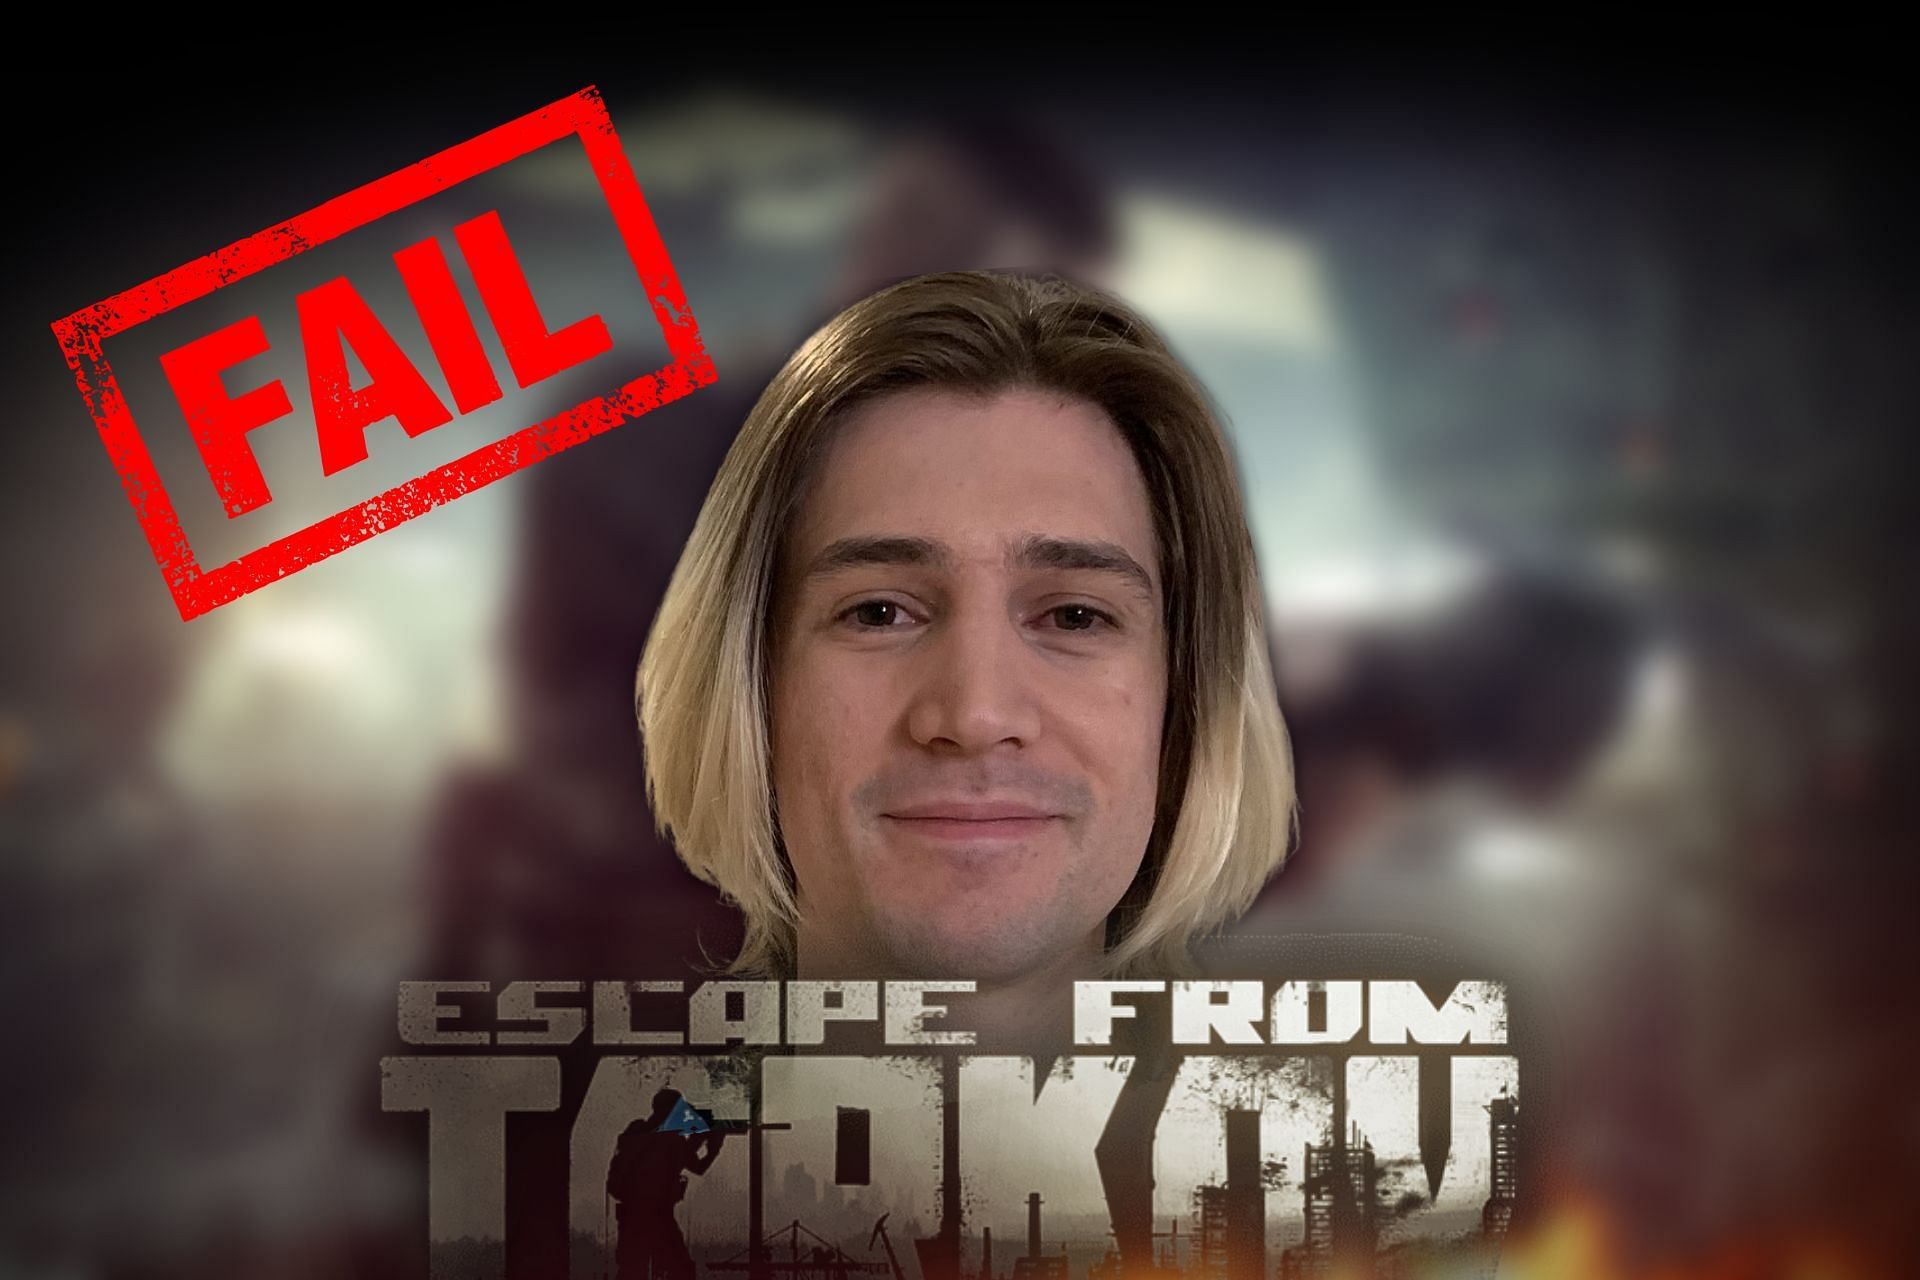 xQc tries to pull off the unthinkable in Escape from Tarkov but fails horribly (Image via Sportskeeda)